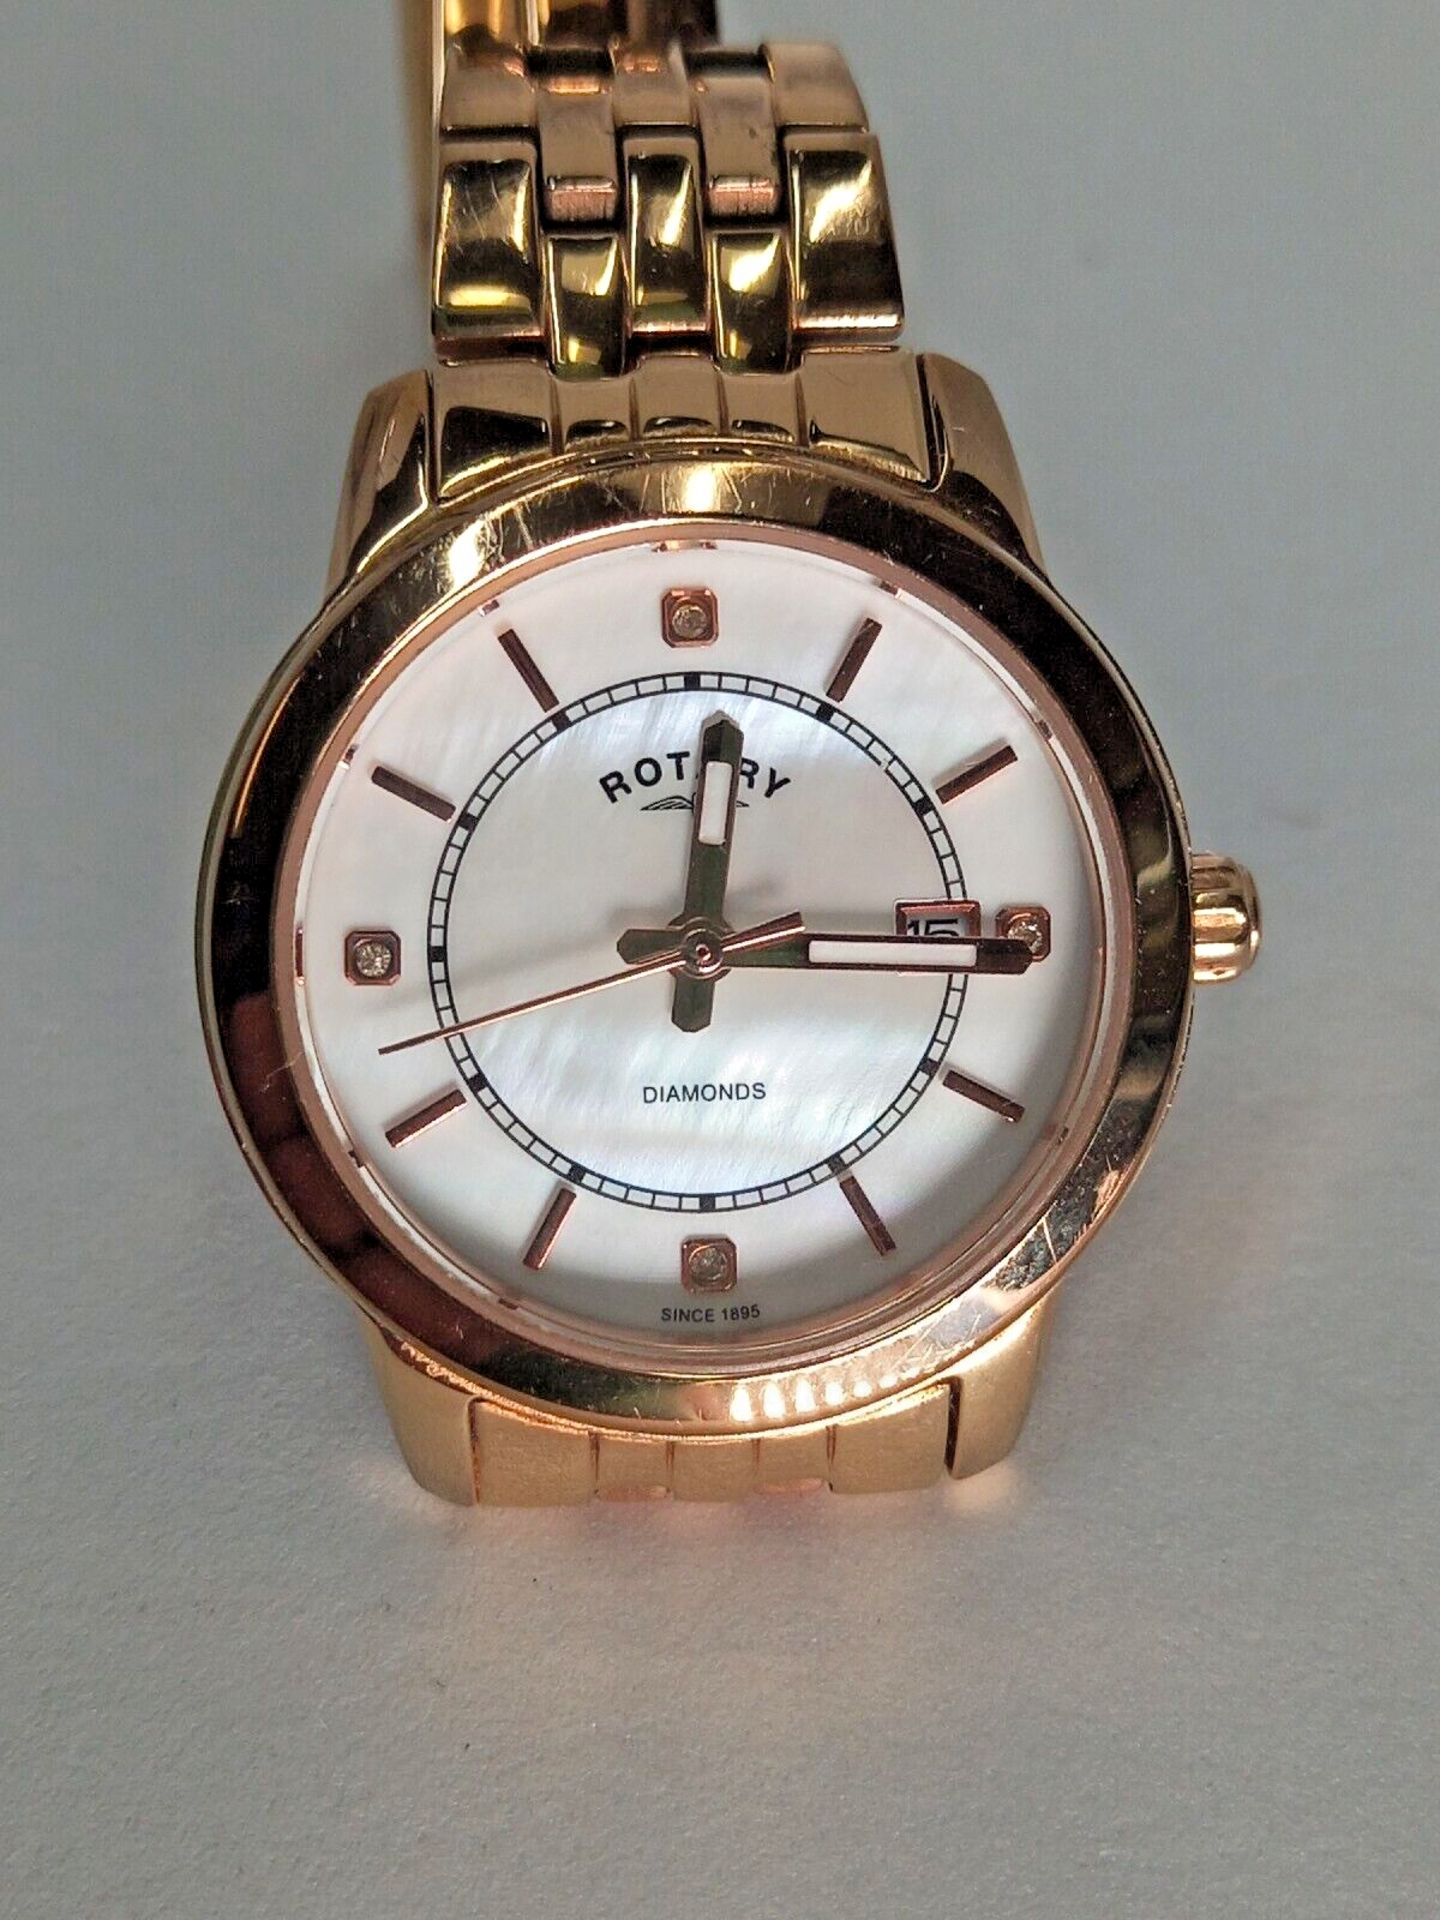 ROTARY LADIES WATCH QUARTZ ROSE GOLD PVD STEEL LB00246/41 DIAMONDS PEARL DIAL - Image 6 of 8